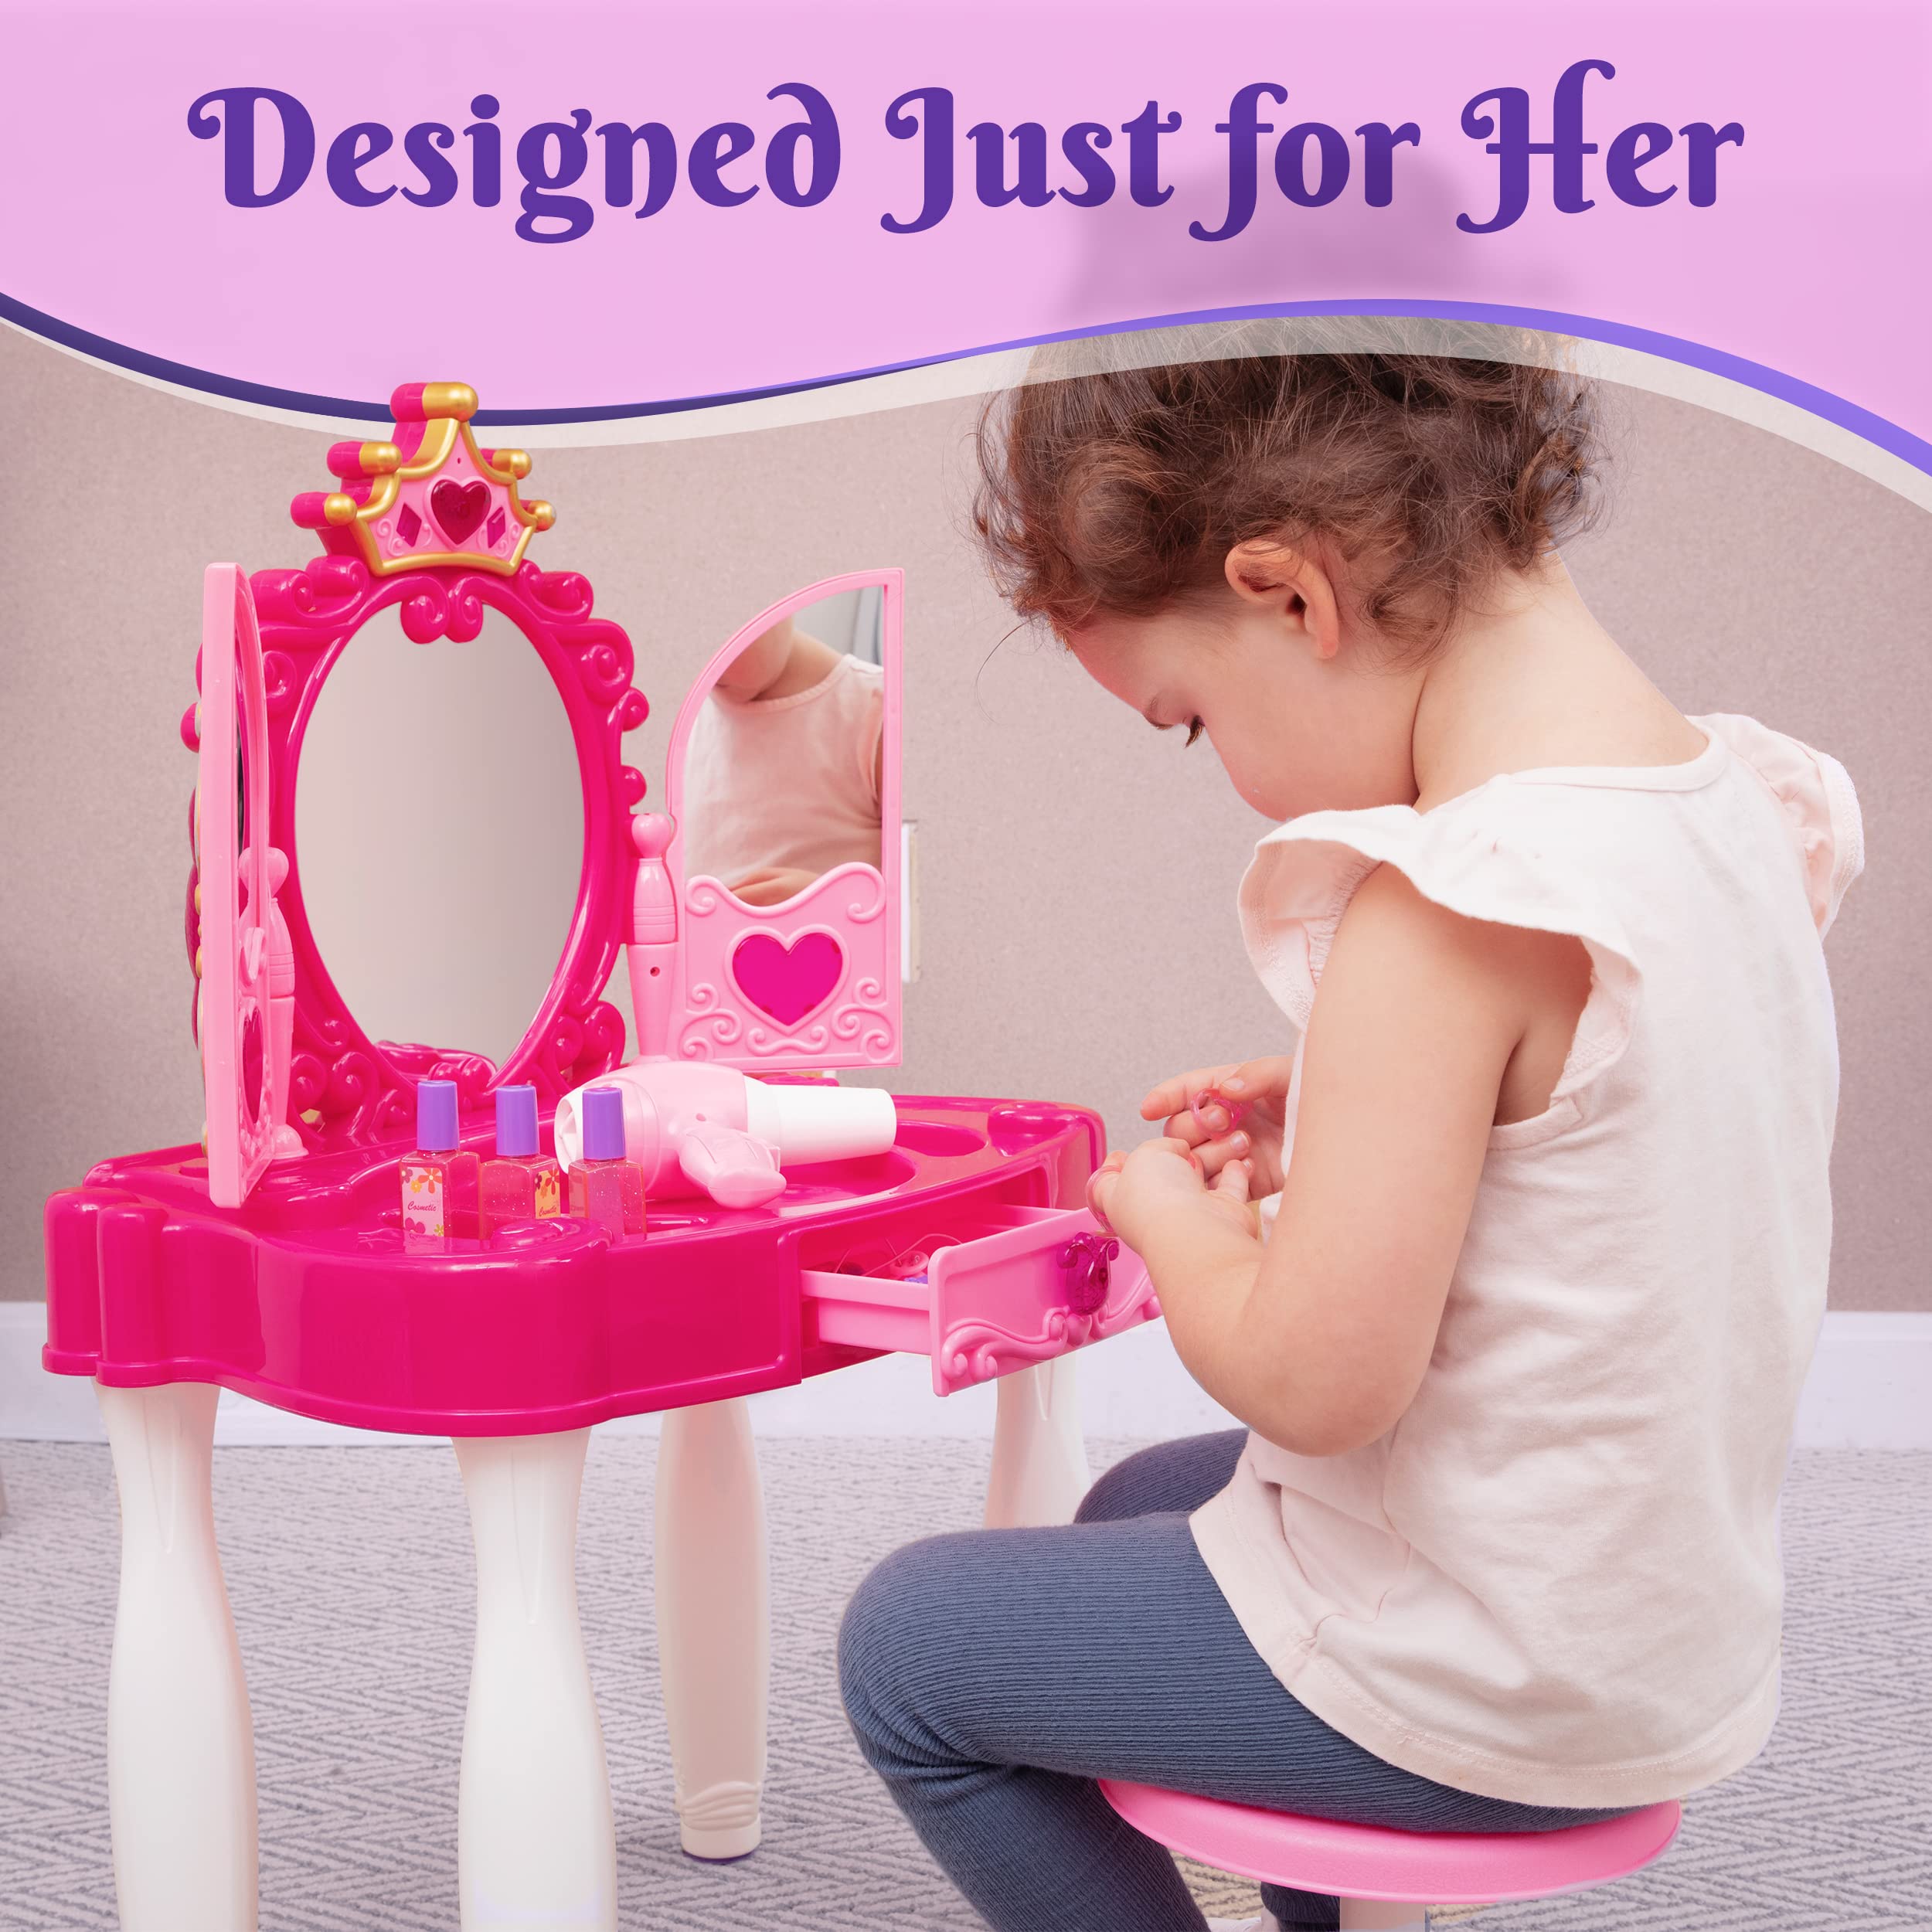 Prextex Kids Makeup Table with Mirror and Chair, Princess Play Set, Vanity Table with Makeup Accessories and Light and Musical Sound Effects for Toddler Girls